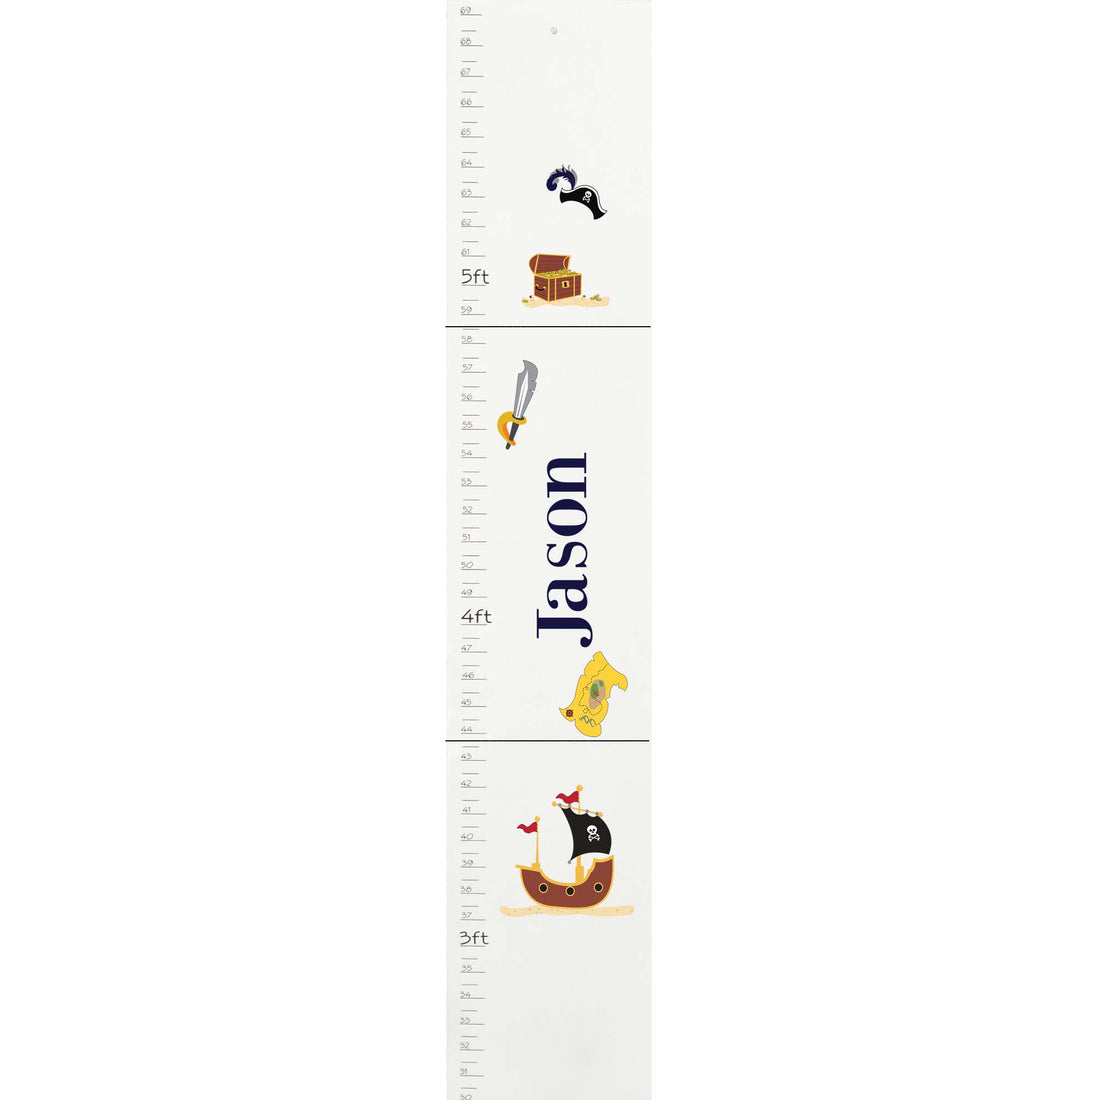 Personalized White Pirate Growth Chart